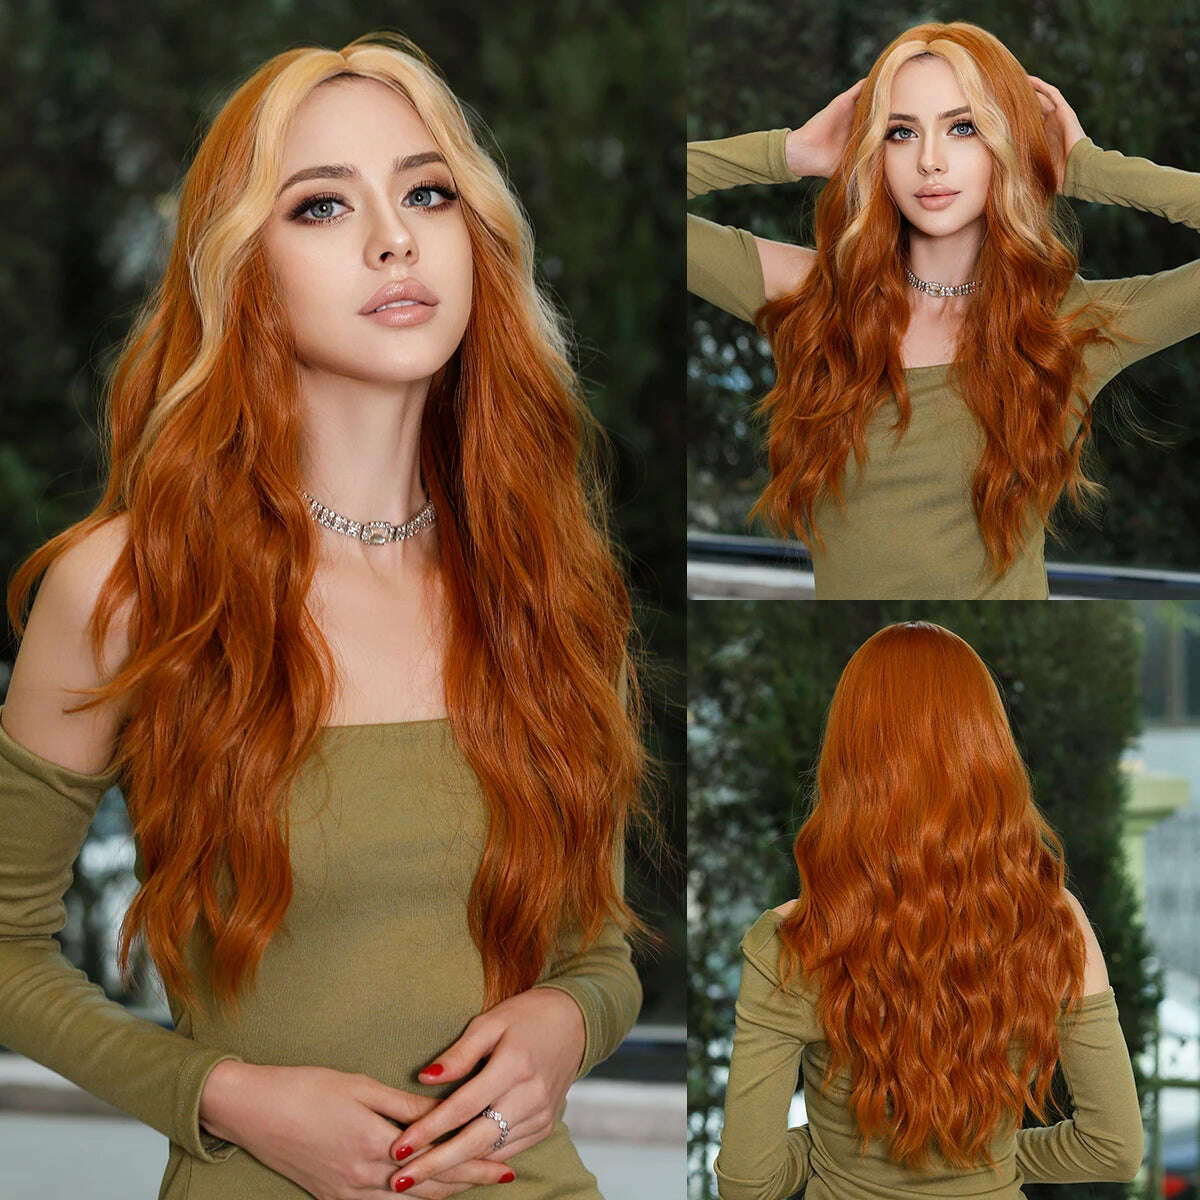 KIMLUD, NAMM Long Wavy Ombre Blonde Wigs for Women Cosplay Daily Party Synthetic Light Orange Hair Wig Lolita Heat Resistant Fiber, KIMLUD Womens Clothes